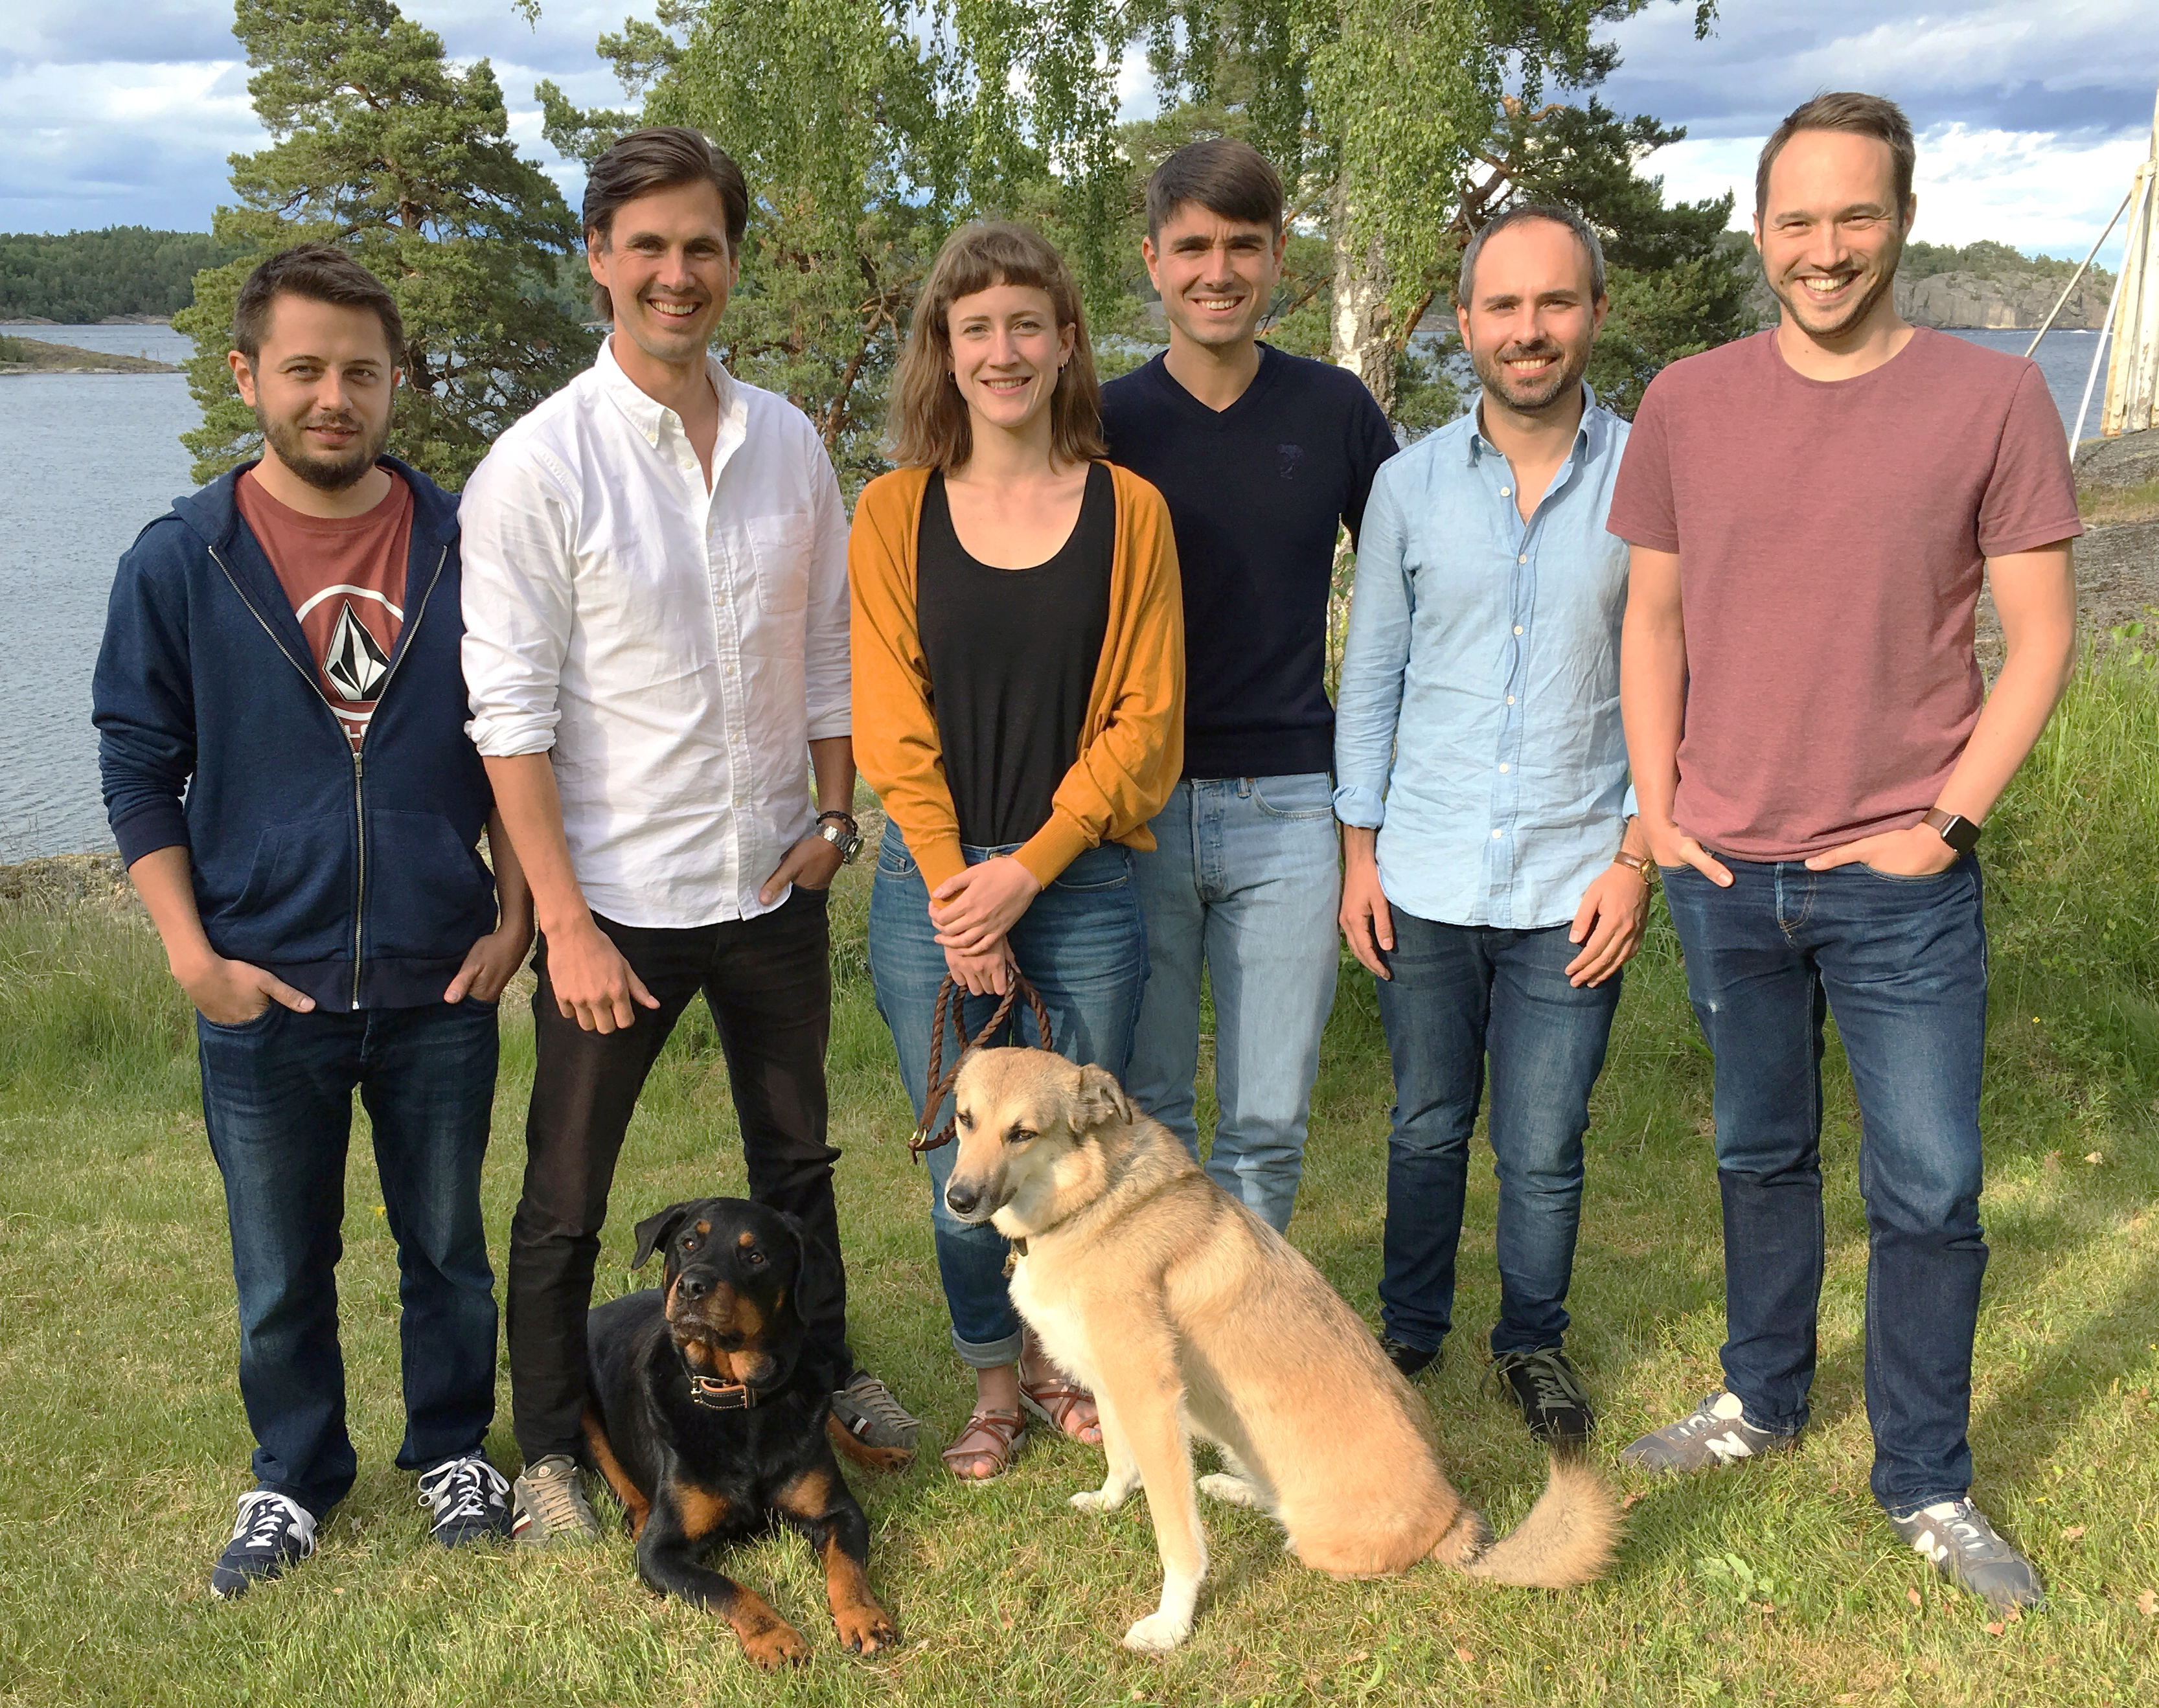 DogBuddy, the European dog sitting marketplace, scores €5M Series A